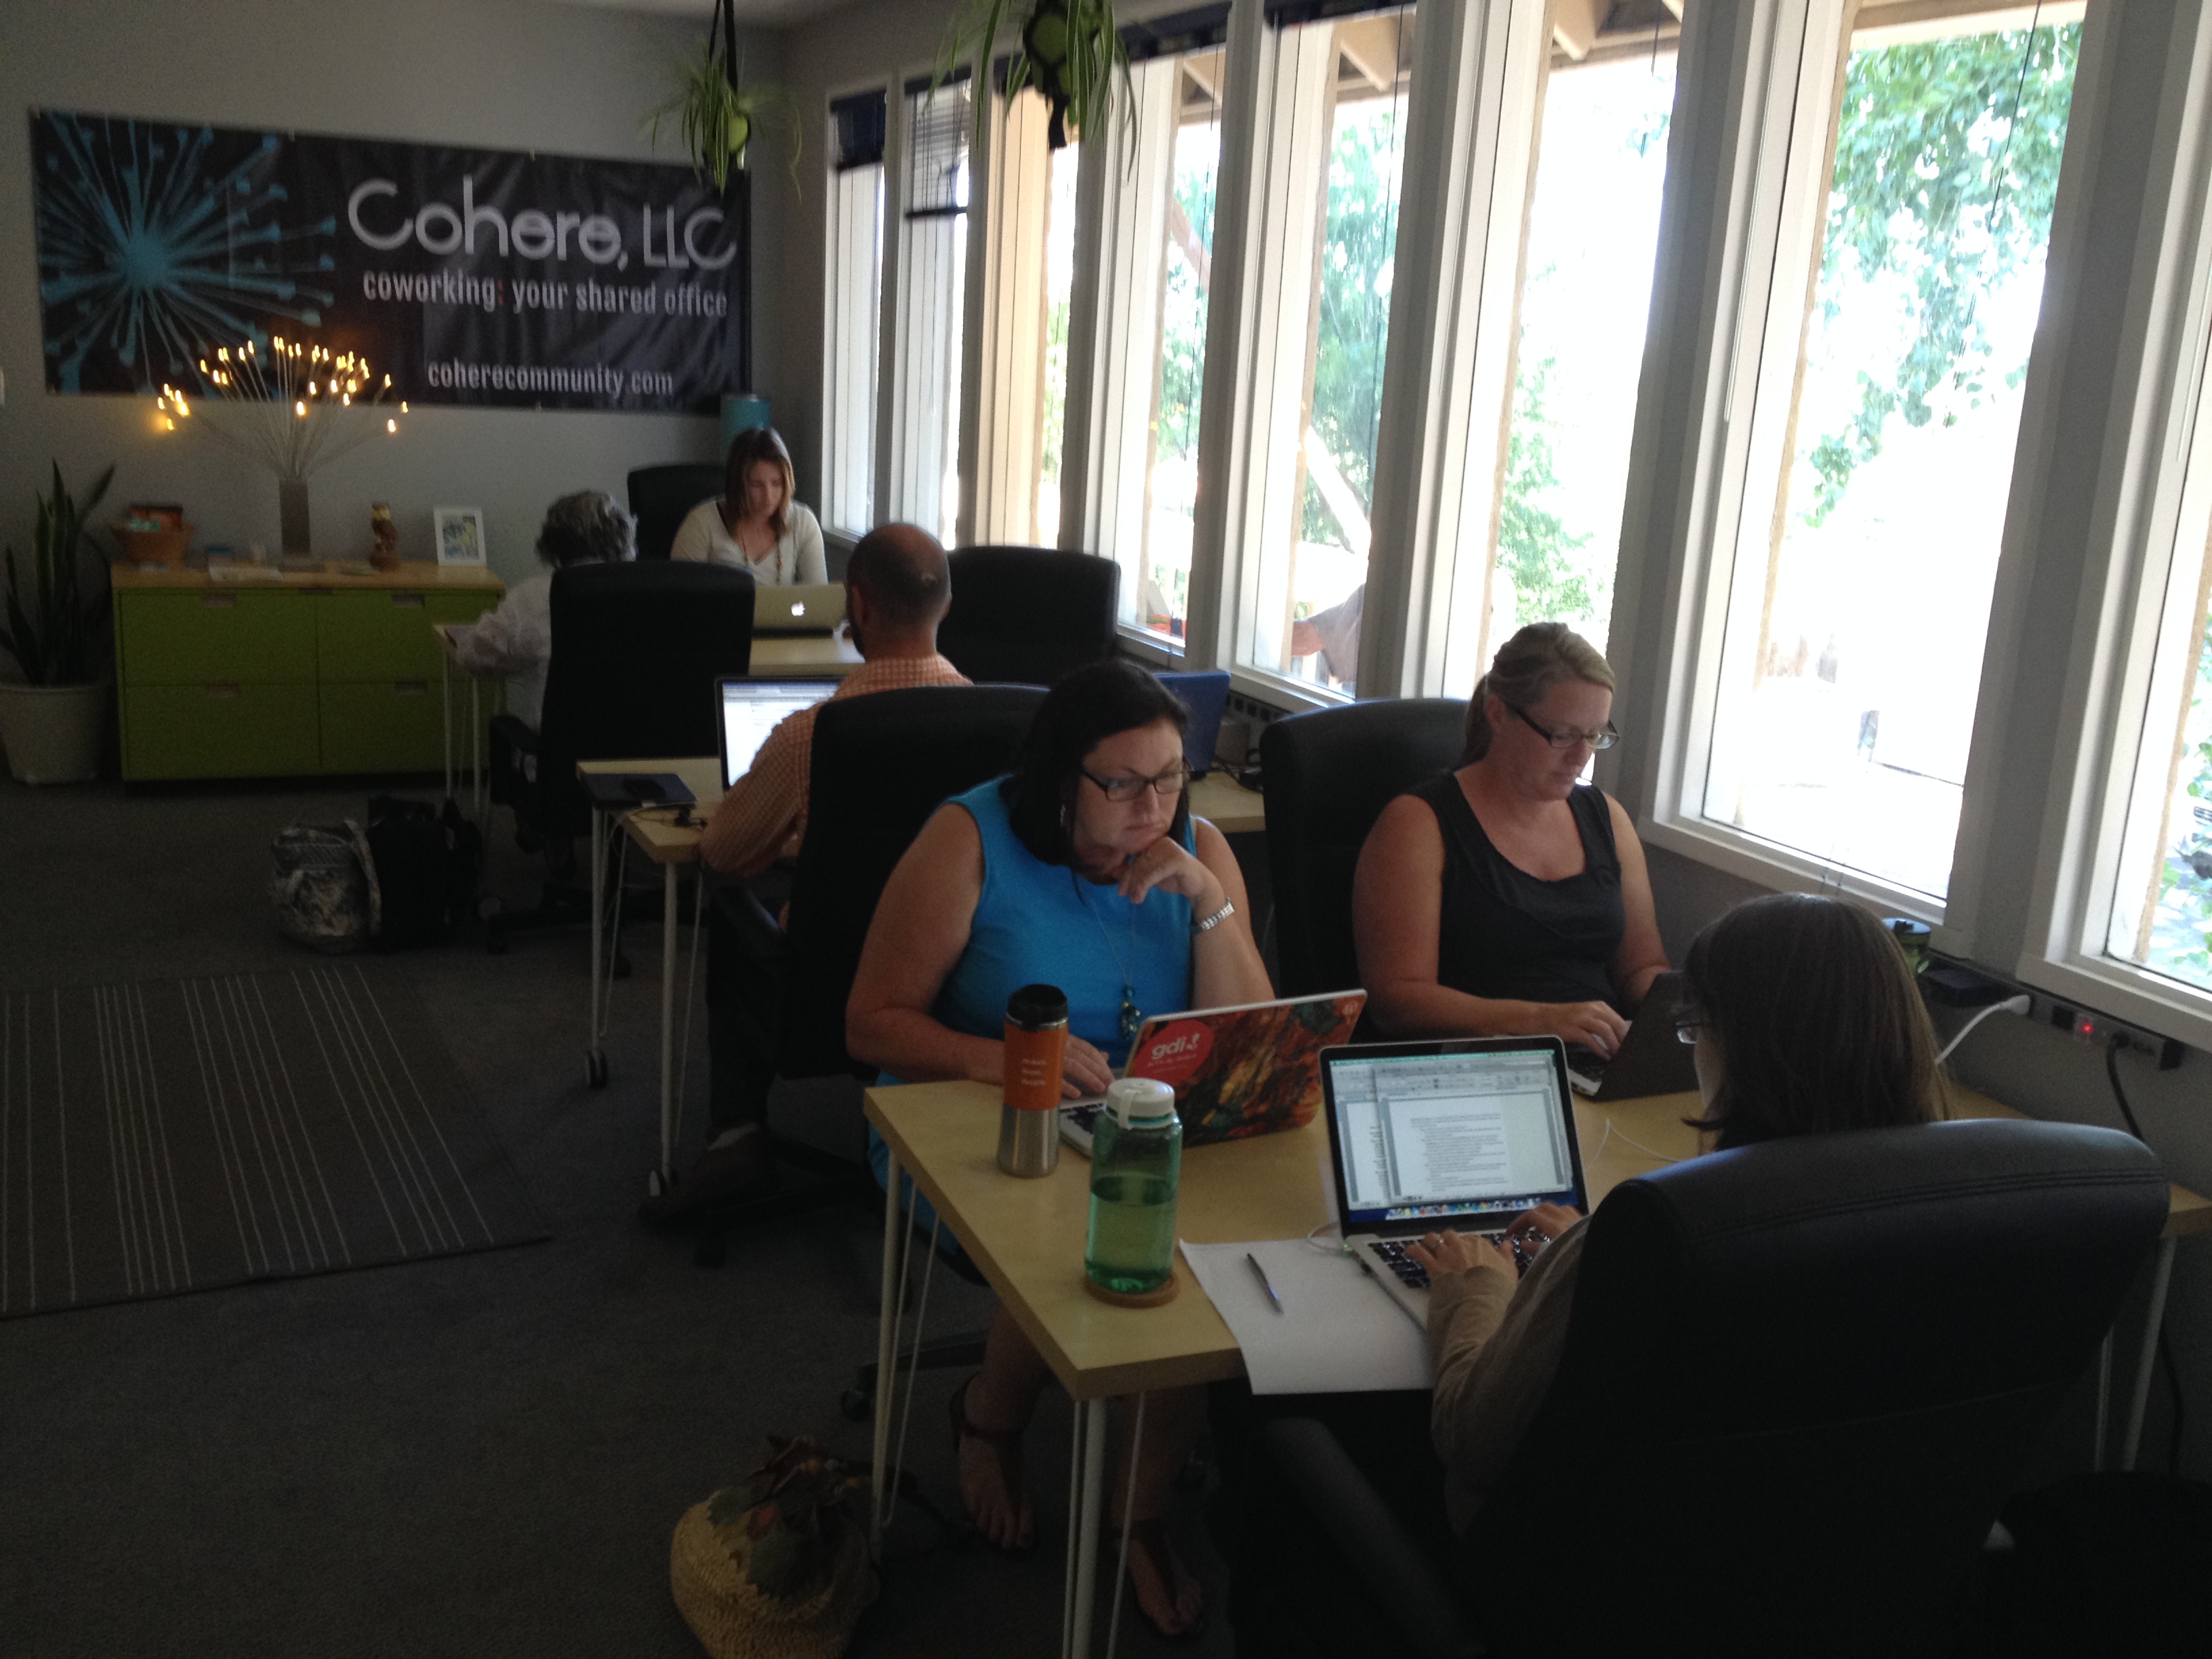 Cothere_Coworking